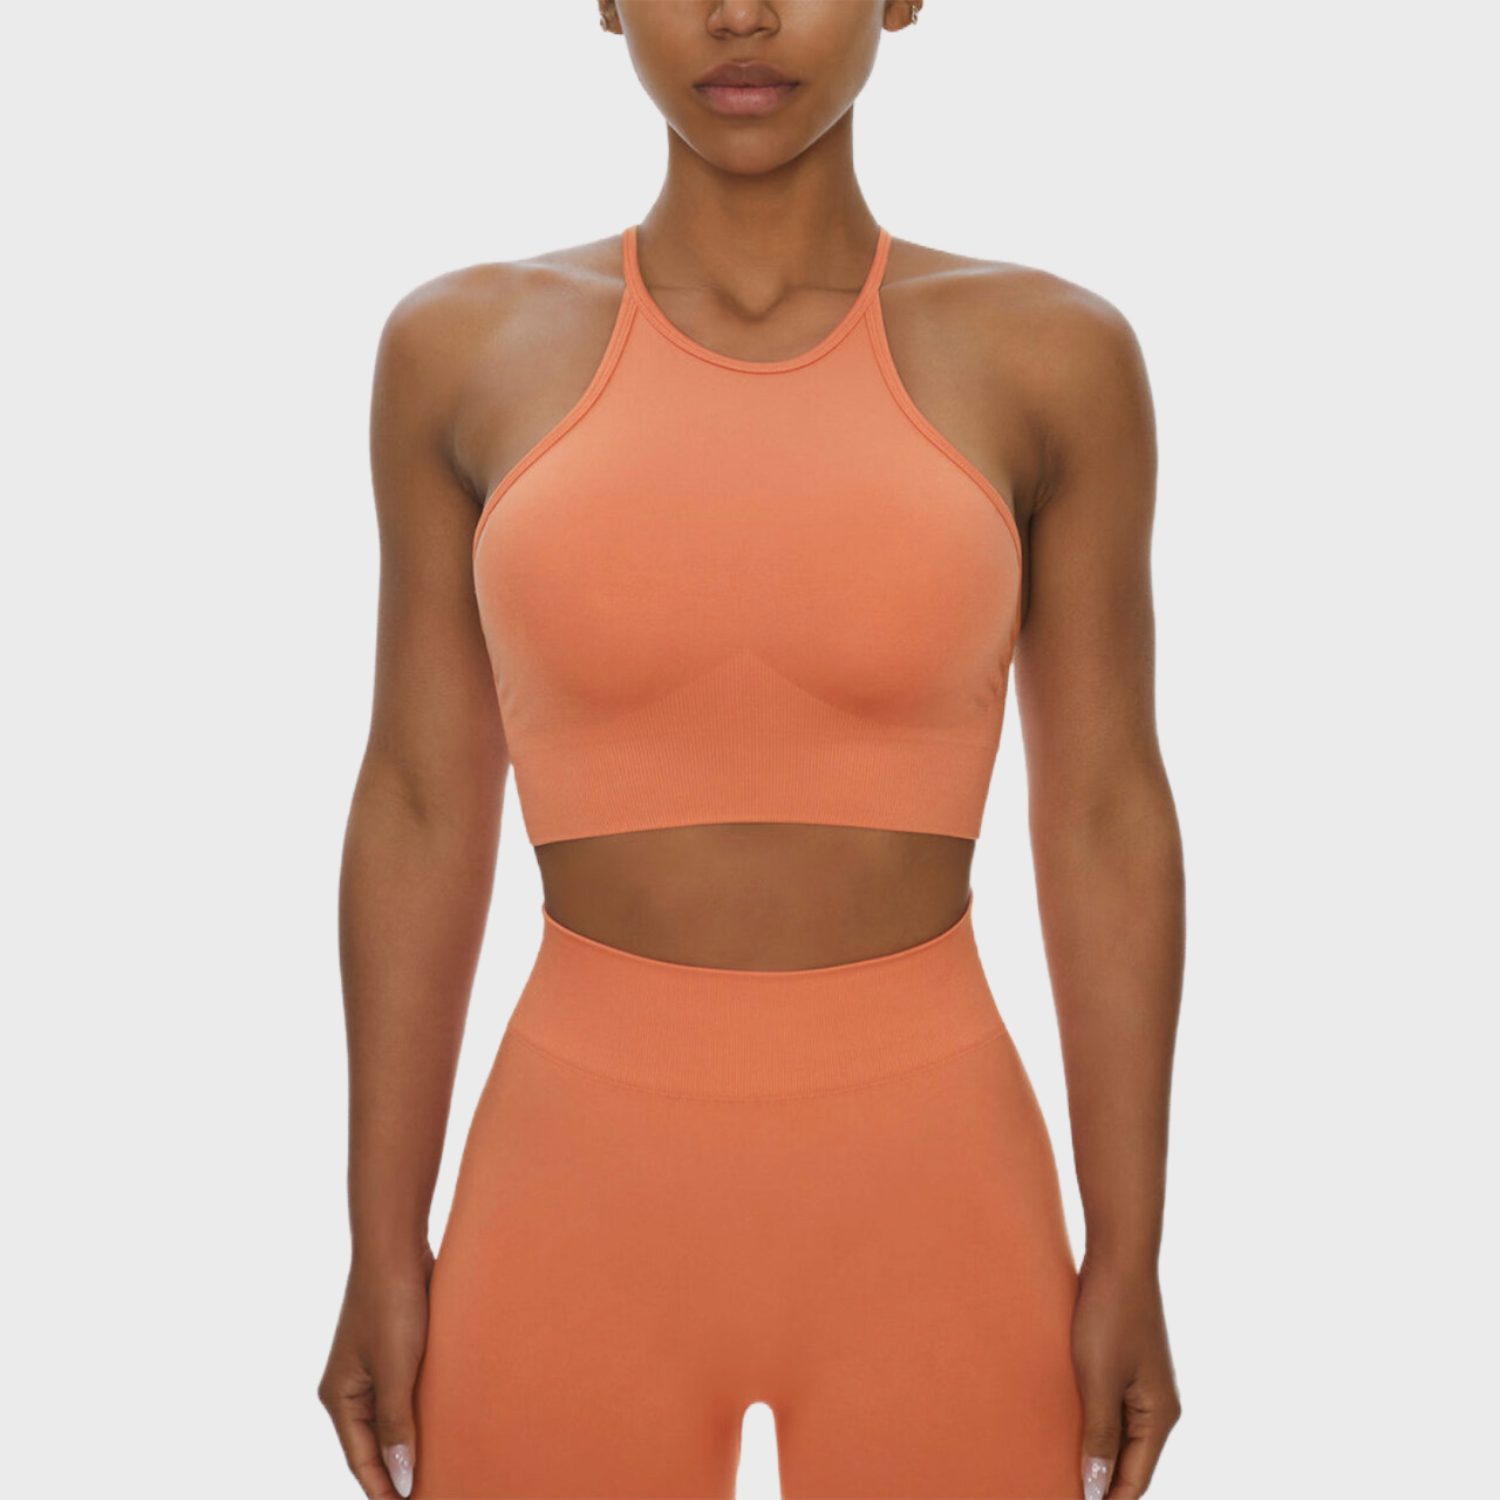 Crop Top Gym Clothes For Women